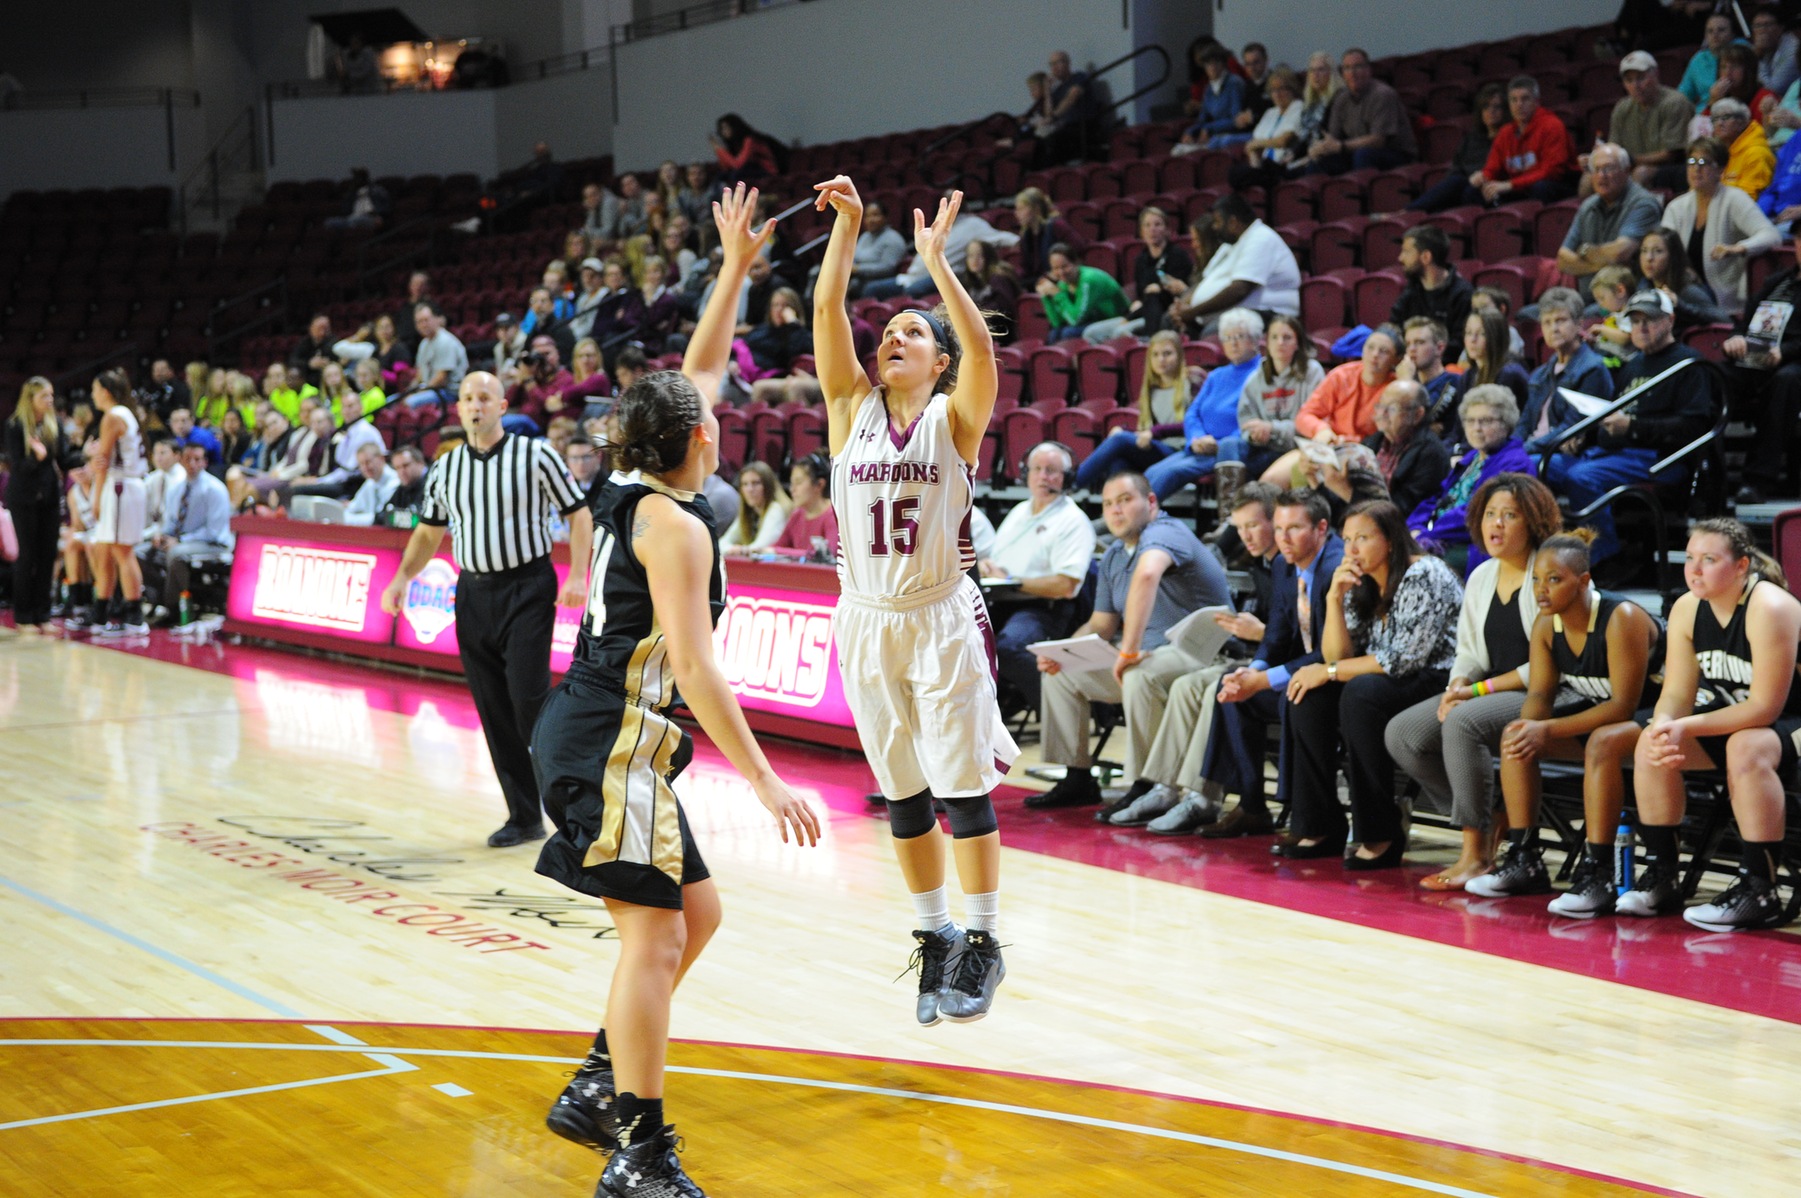 Women's Basketball Molly Hassell #15